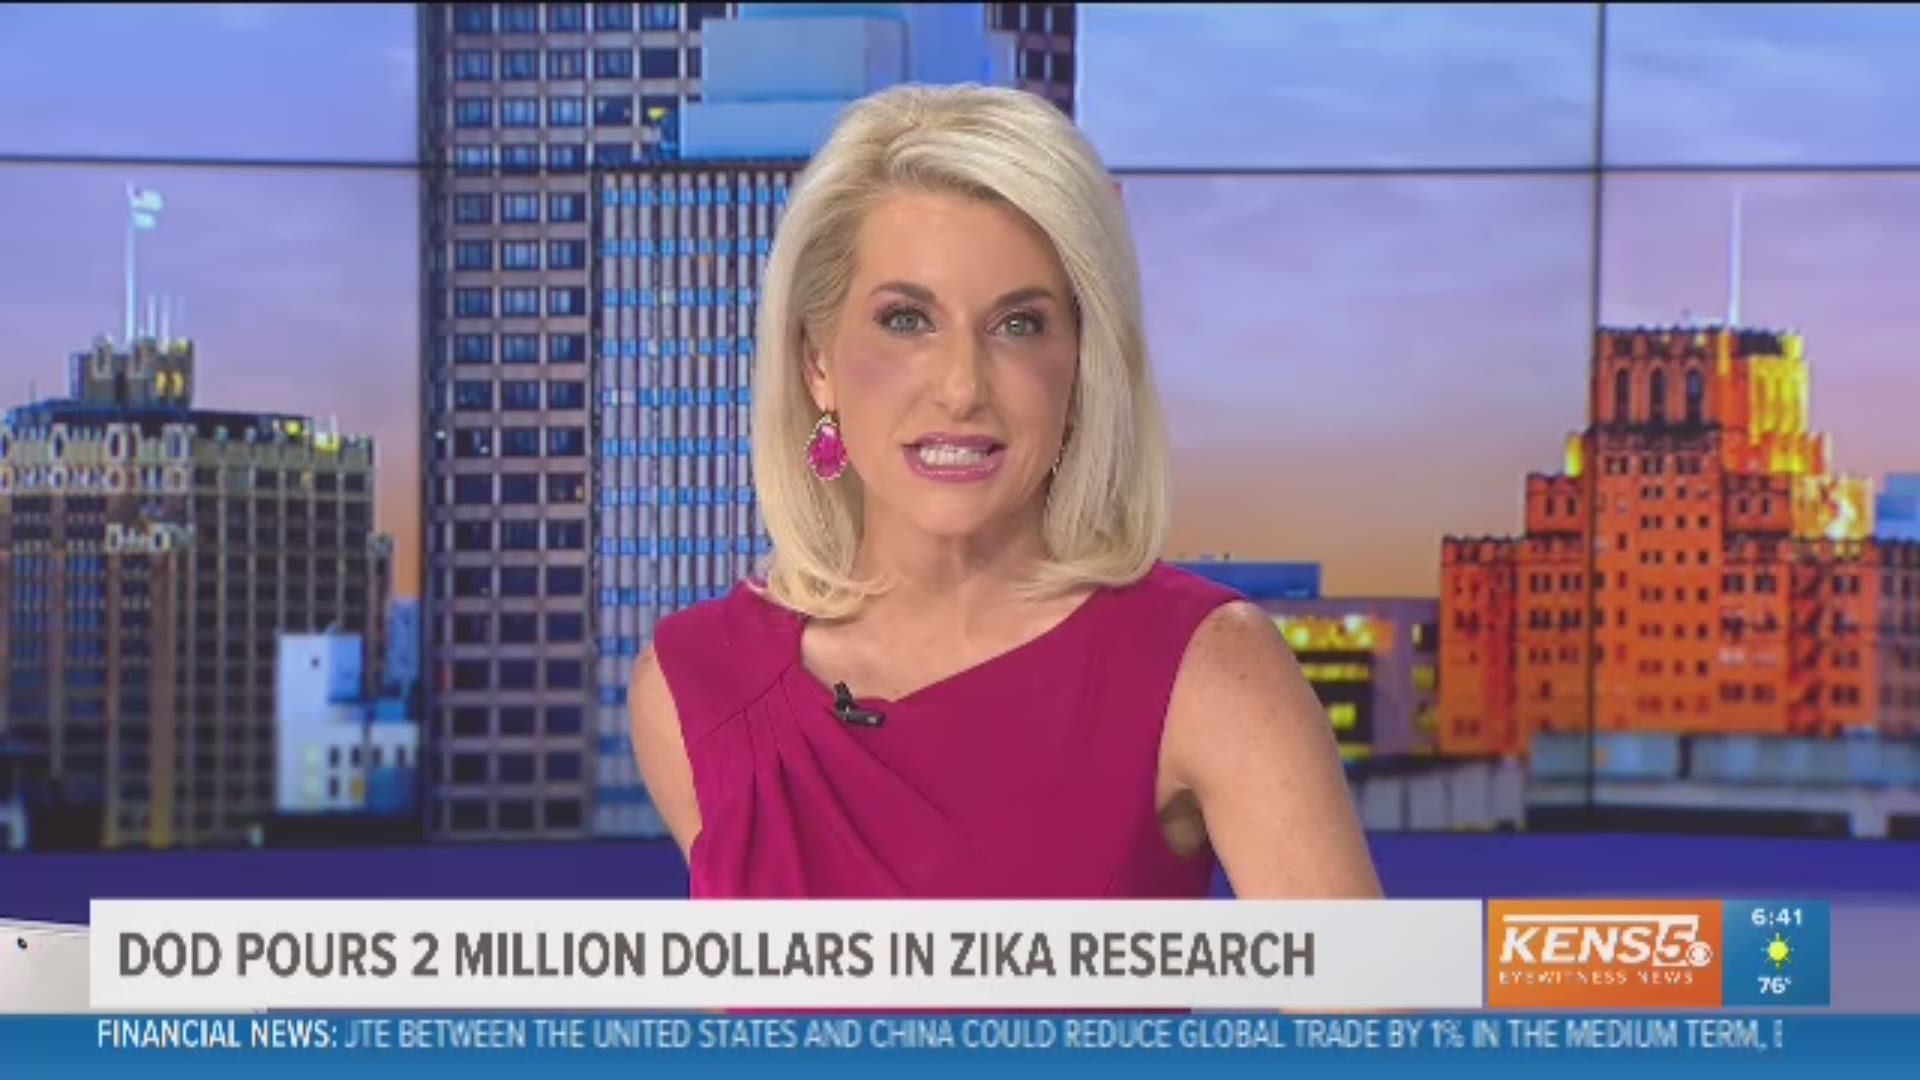 The Department of Defense is awarding Texas Biomedical Research Institute $2 million over the next three years toward an experimental Zika vaccine.